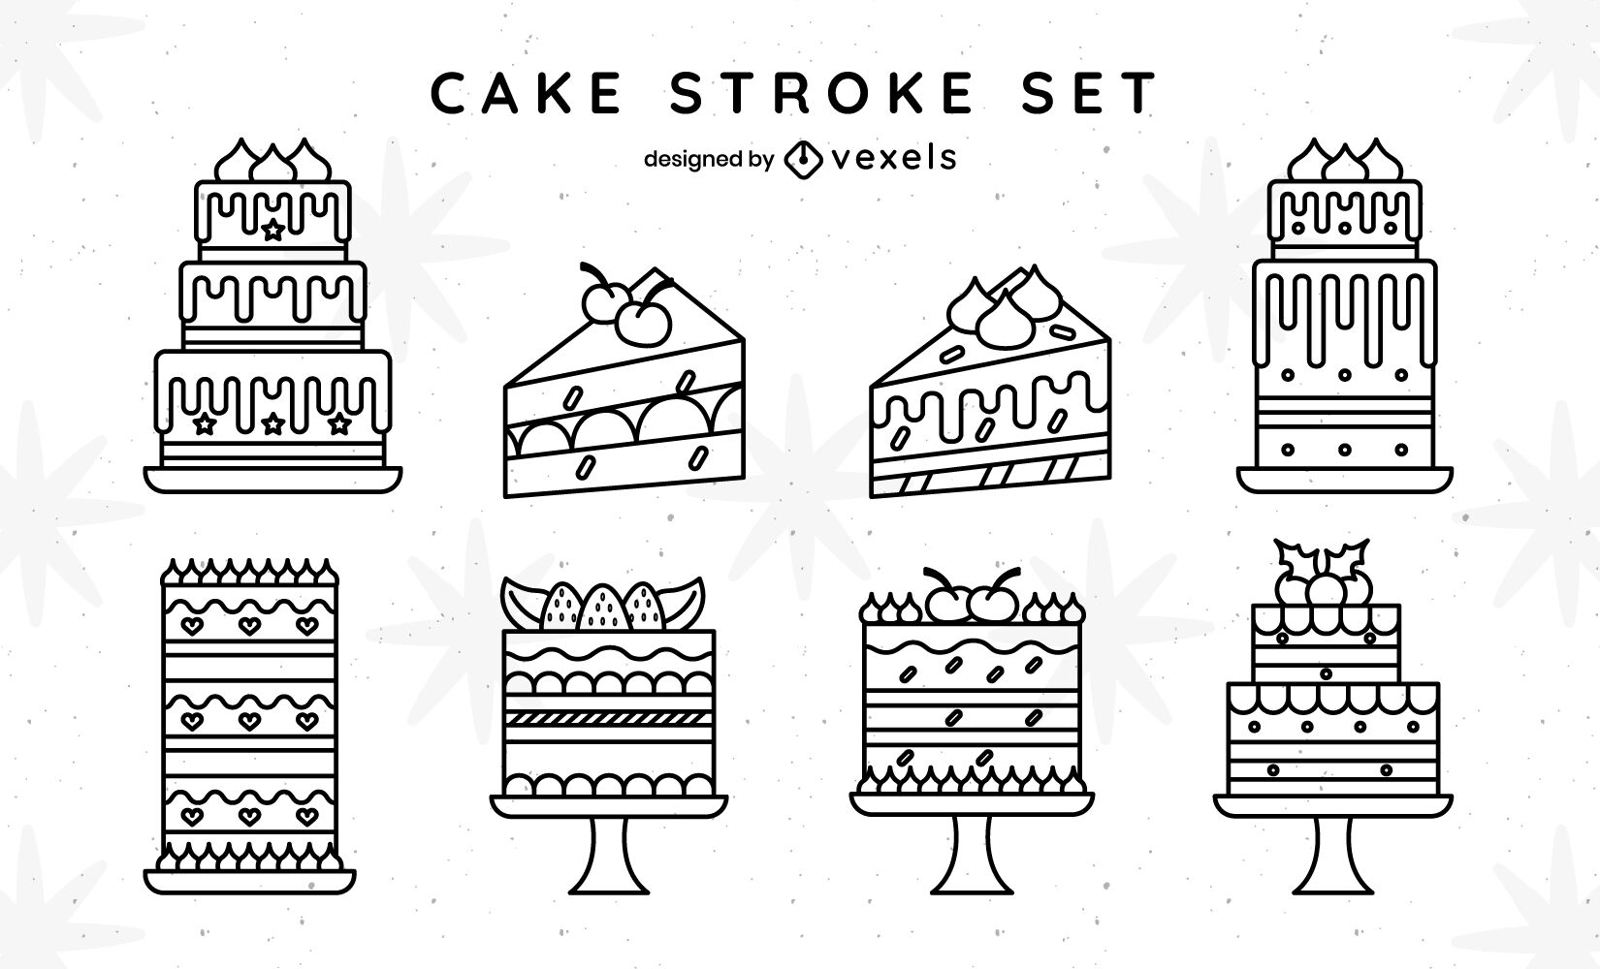 Delicious cakes and slices stroke set